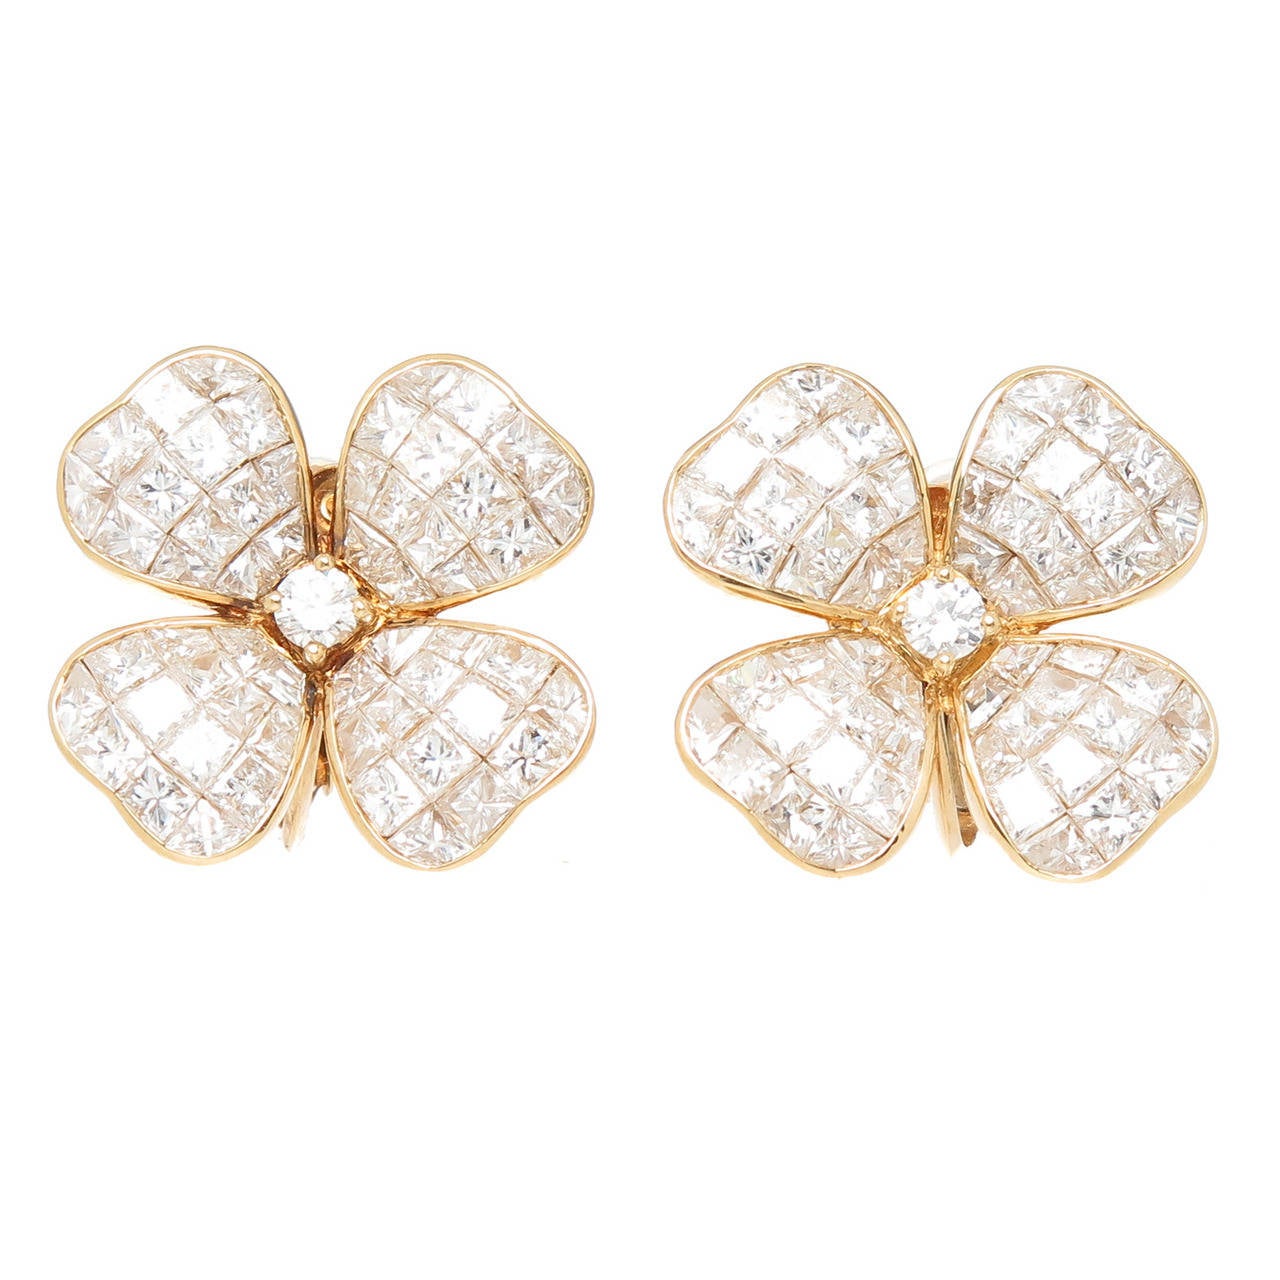 Invisibly Set Diamond Gold Flower Ear Clips